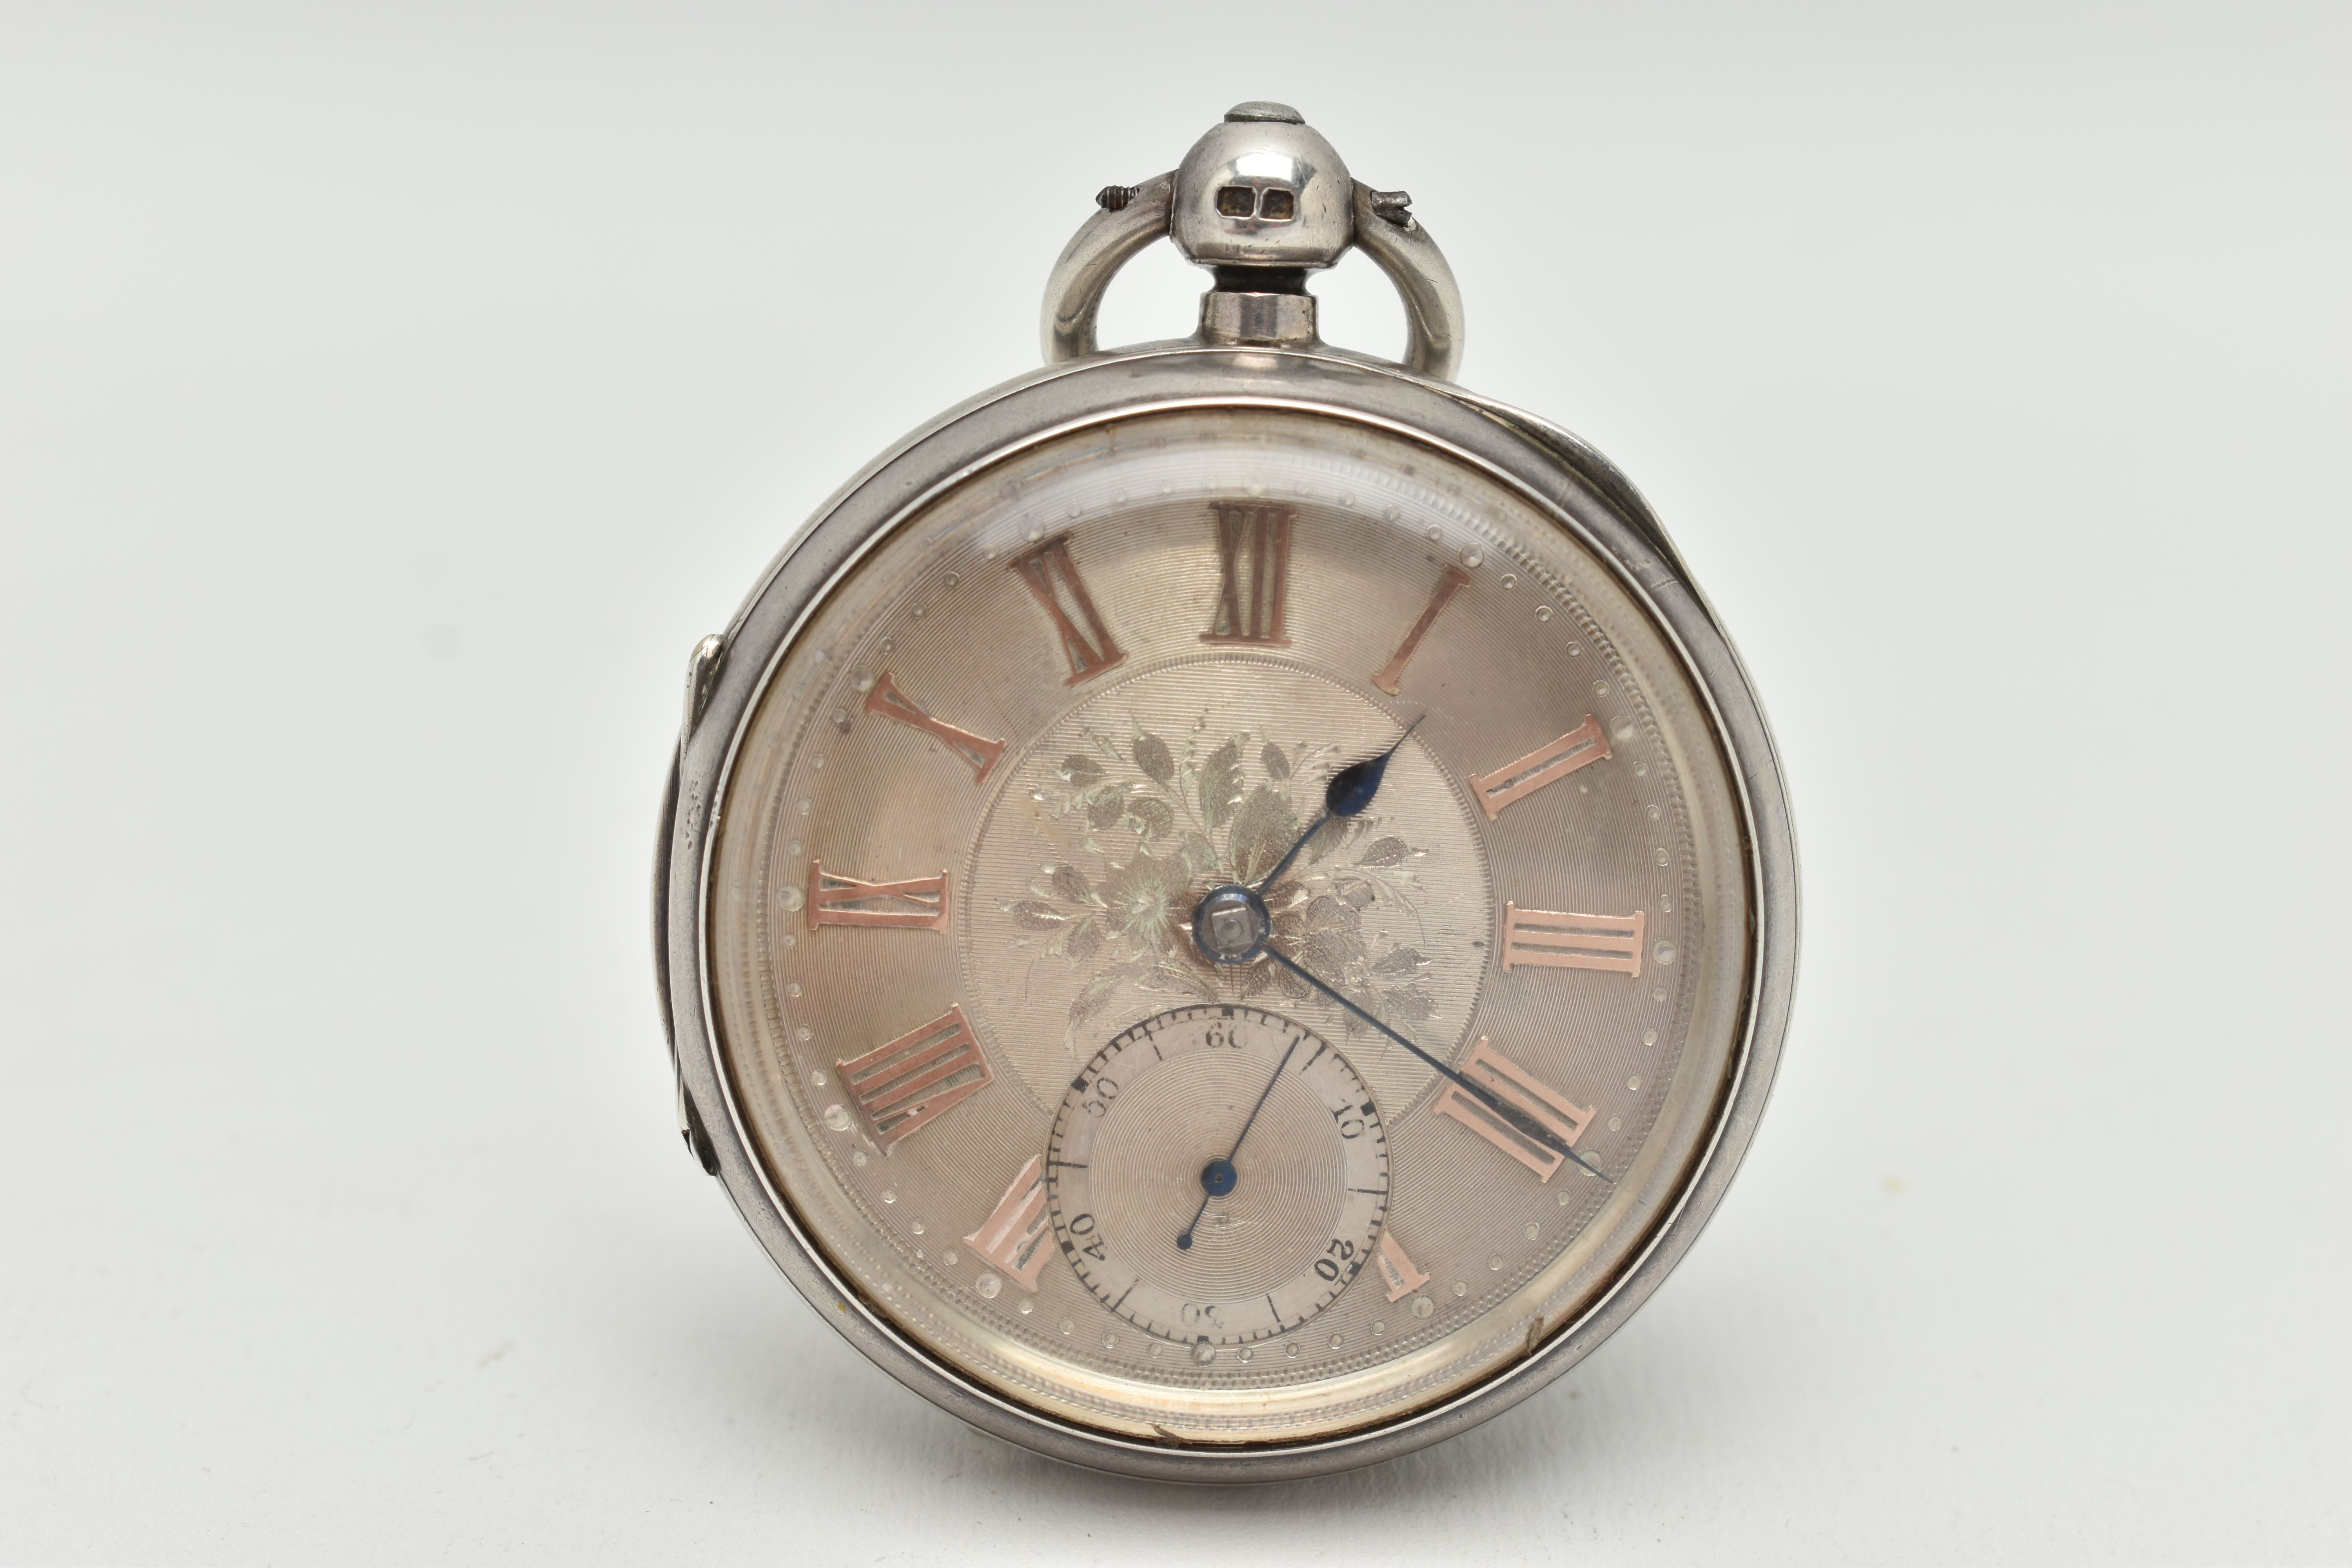 A LATE VICTORIAN SILVER OPEN FACE POCKET WATCH, key wound, round silver floral pattern dial with